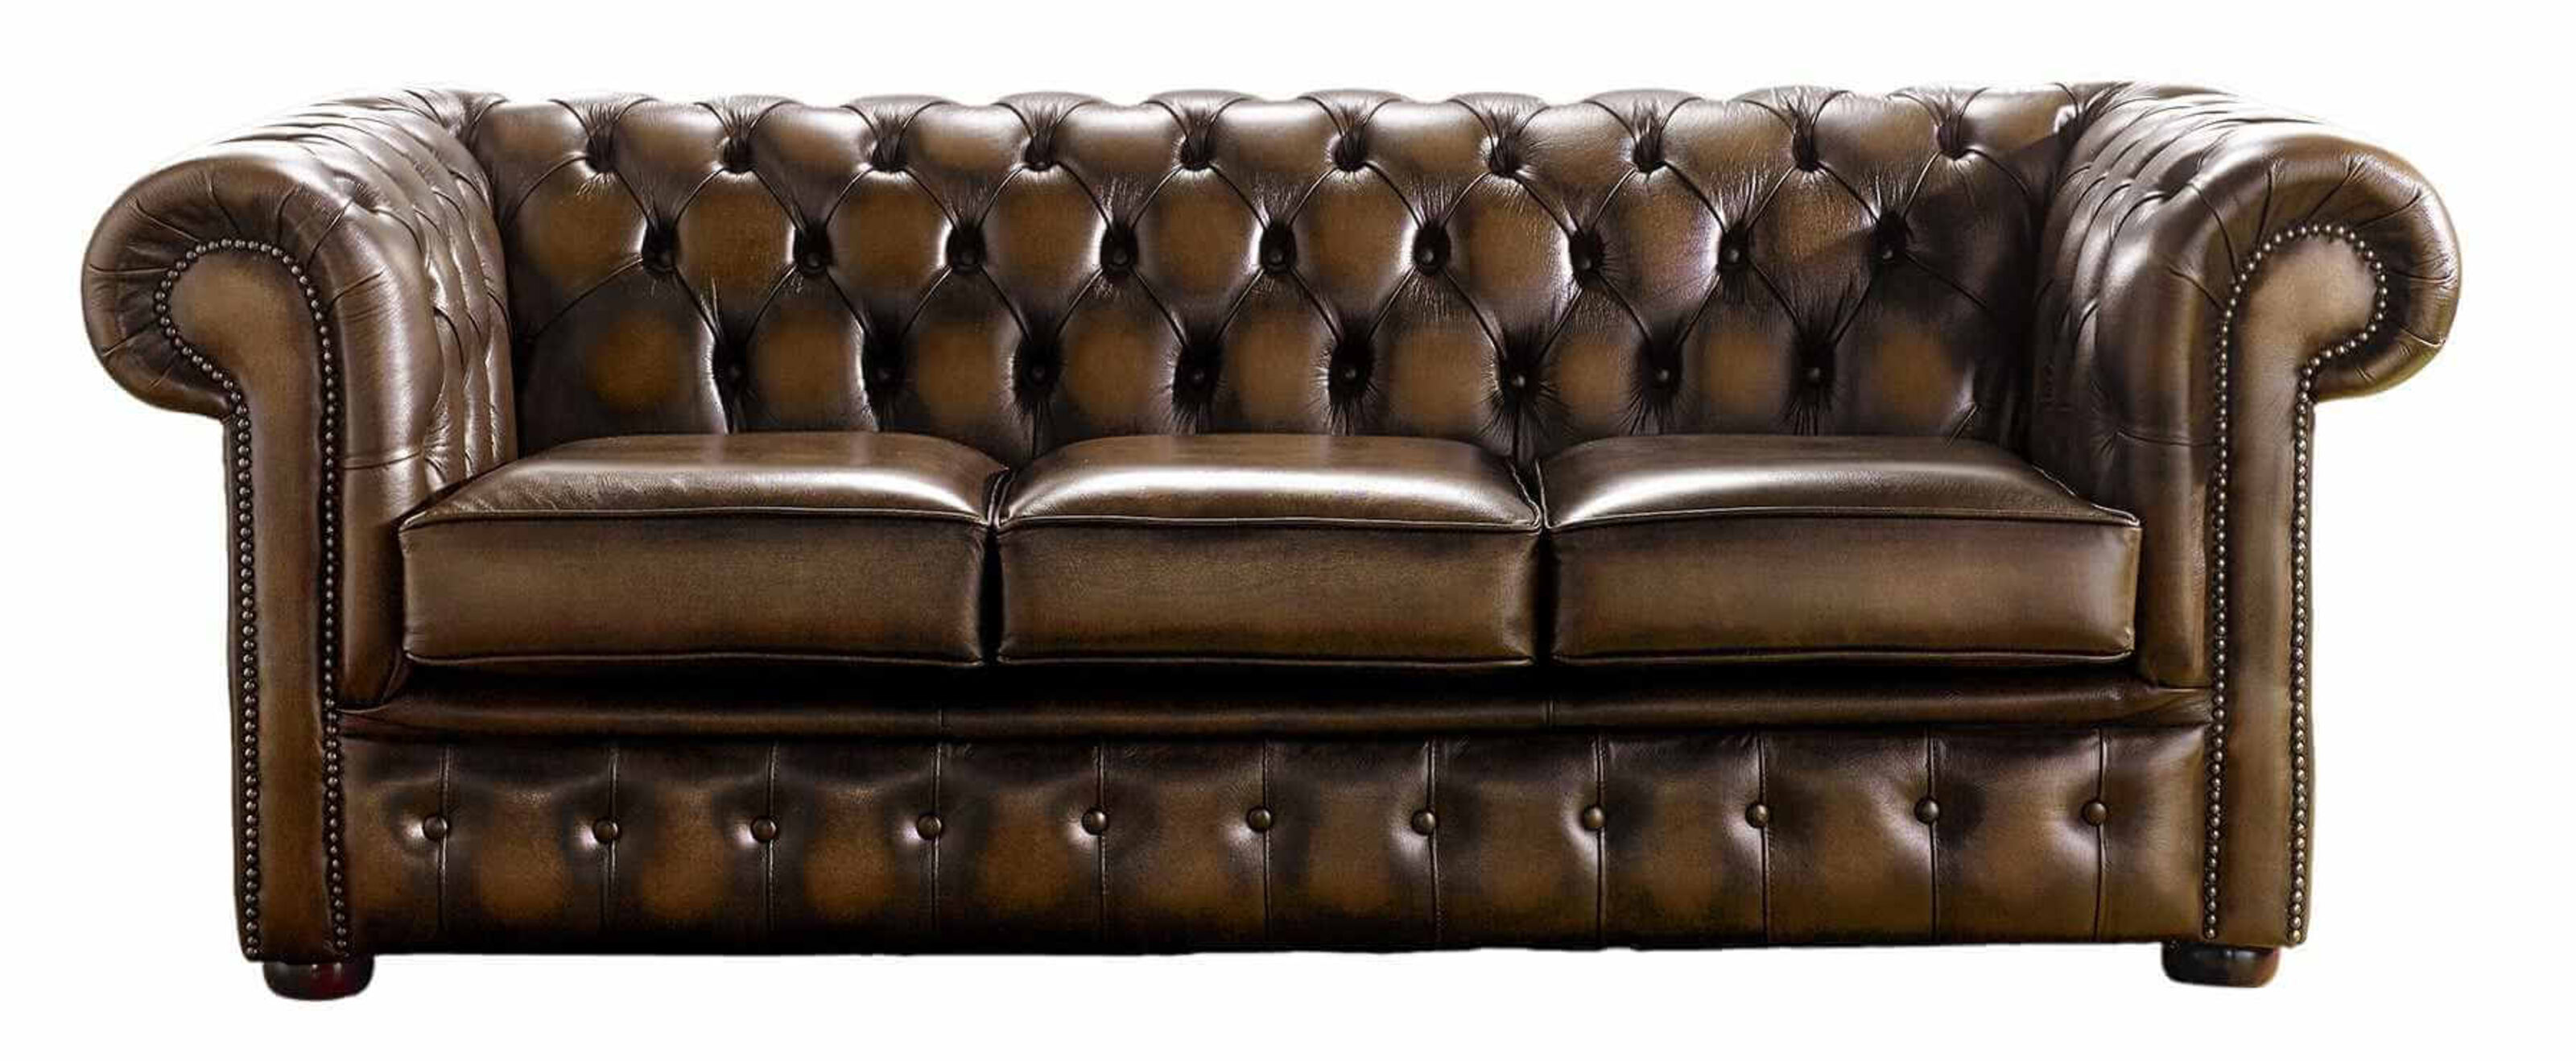 Embrace Versatility and Comfort with a Chesterfield Sofabed  %Post Title